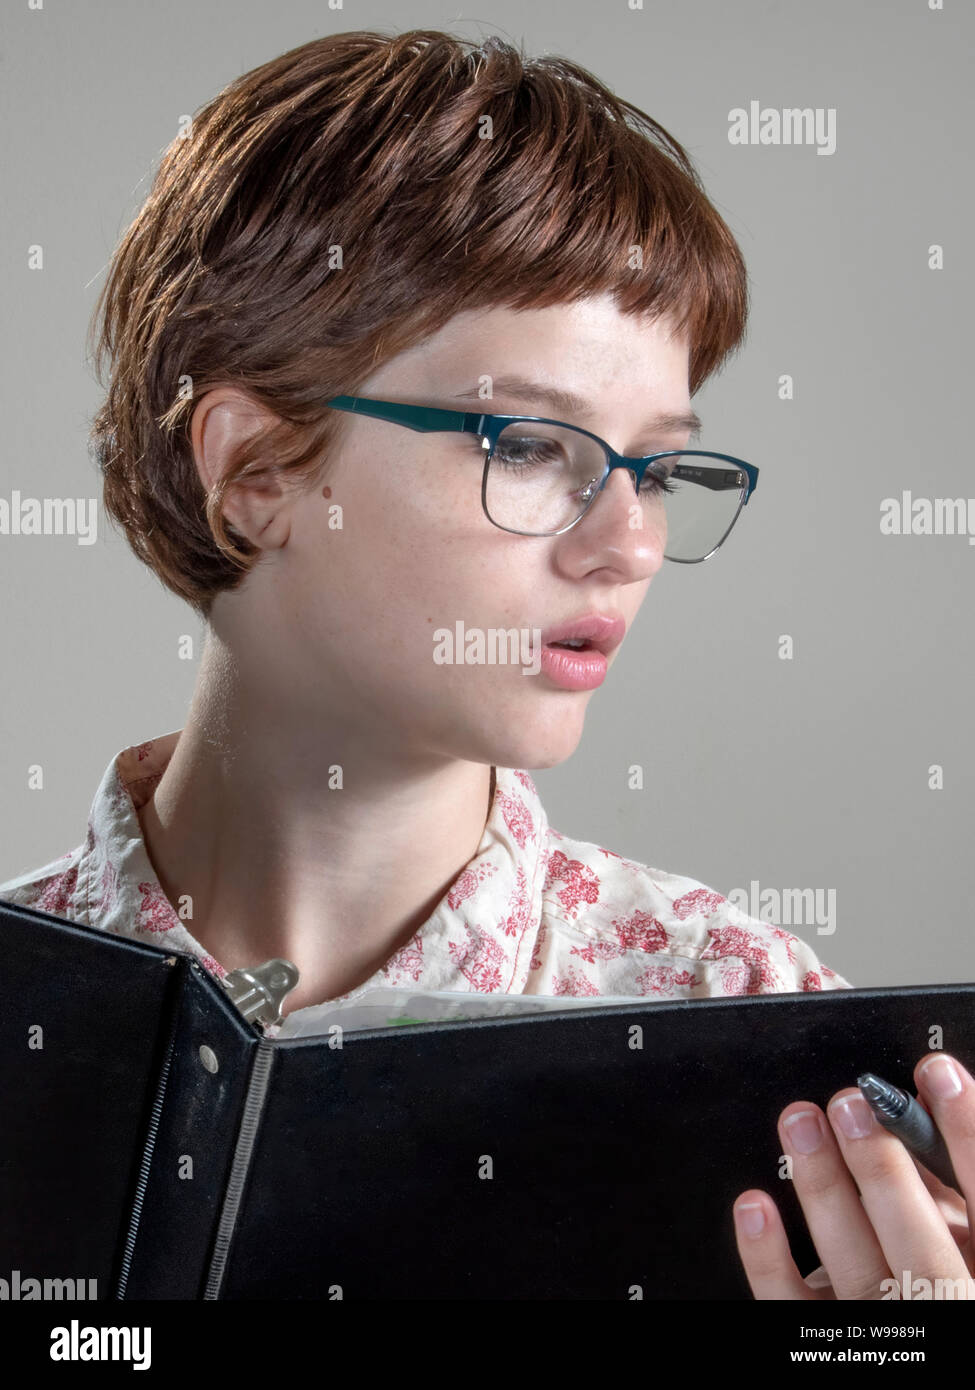 BOSSIER CITY, LA., U.S.A.. - AUG. 8, 2019: A pretty, young woman, pen in hand, peruses the content of a ring binder. Stock Photo